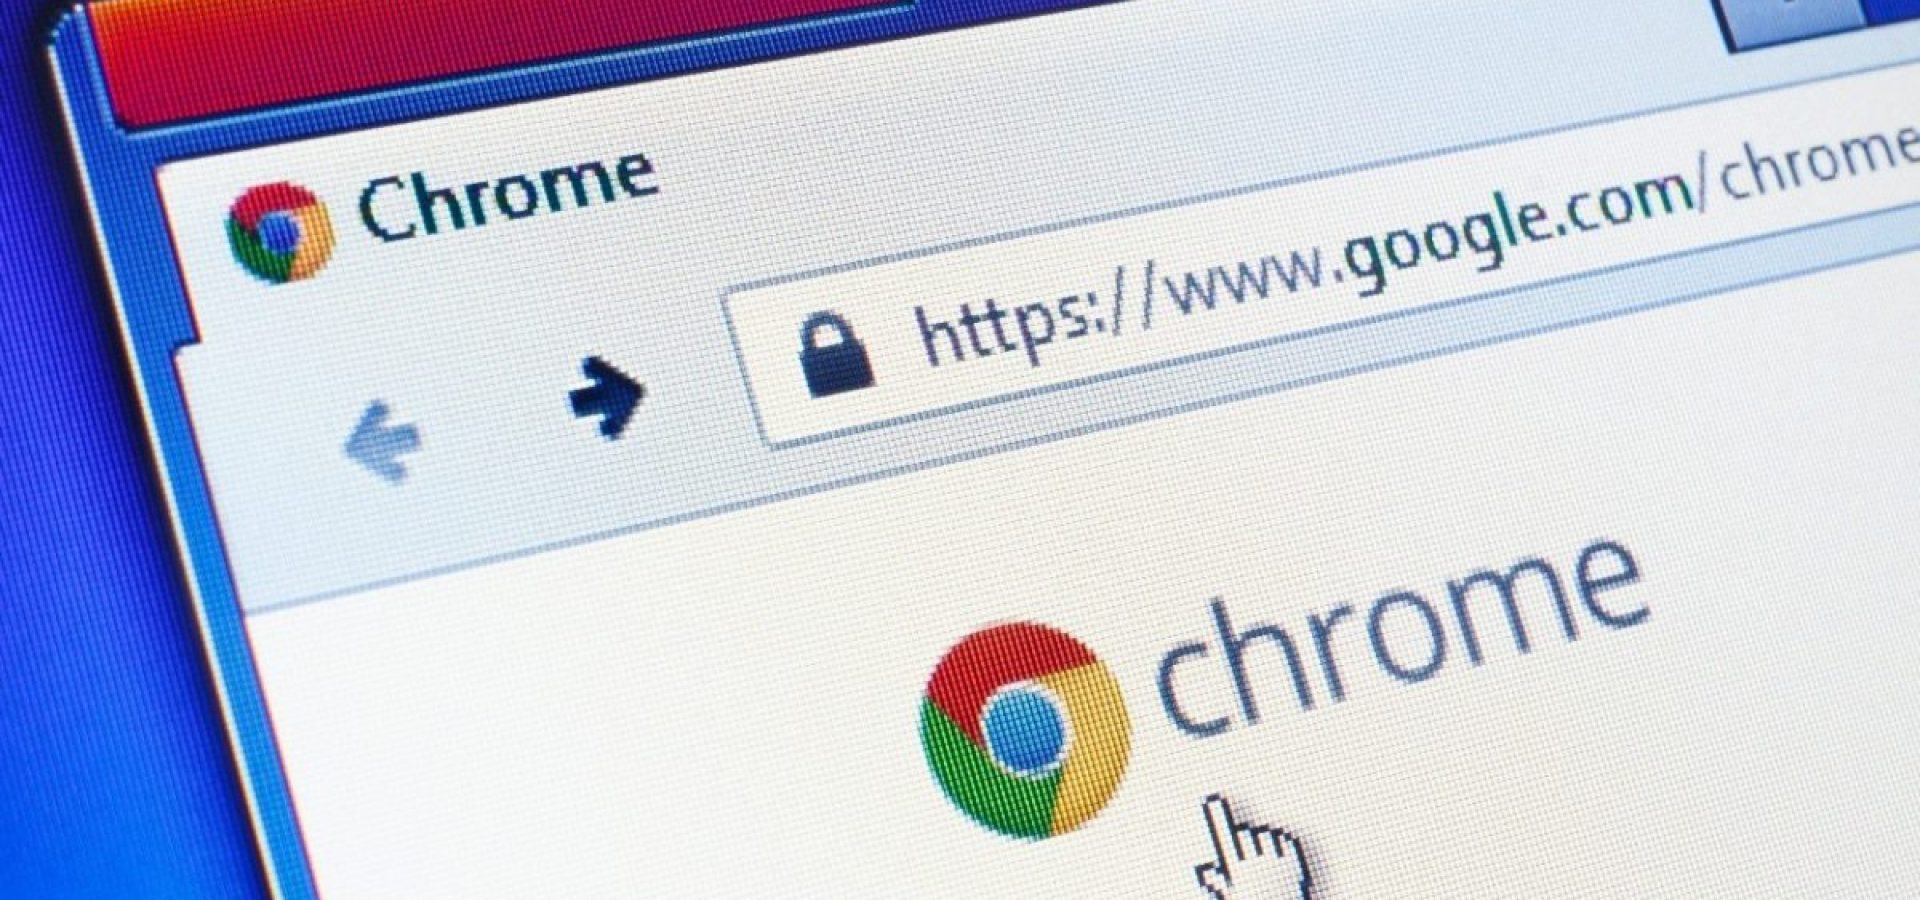 Google has tried to bring improvements to Chrome 89